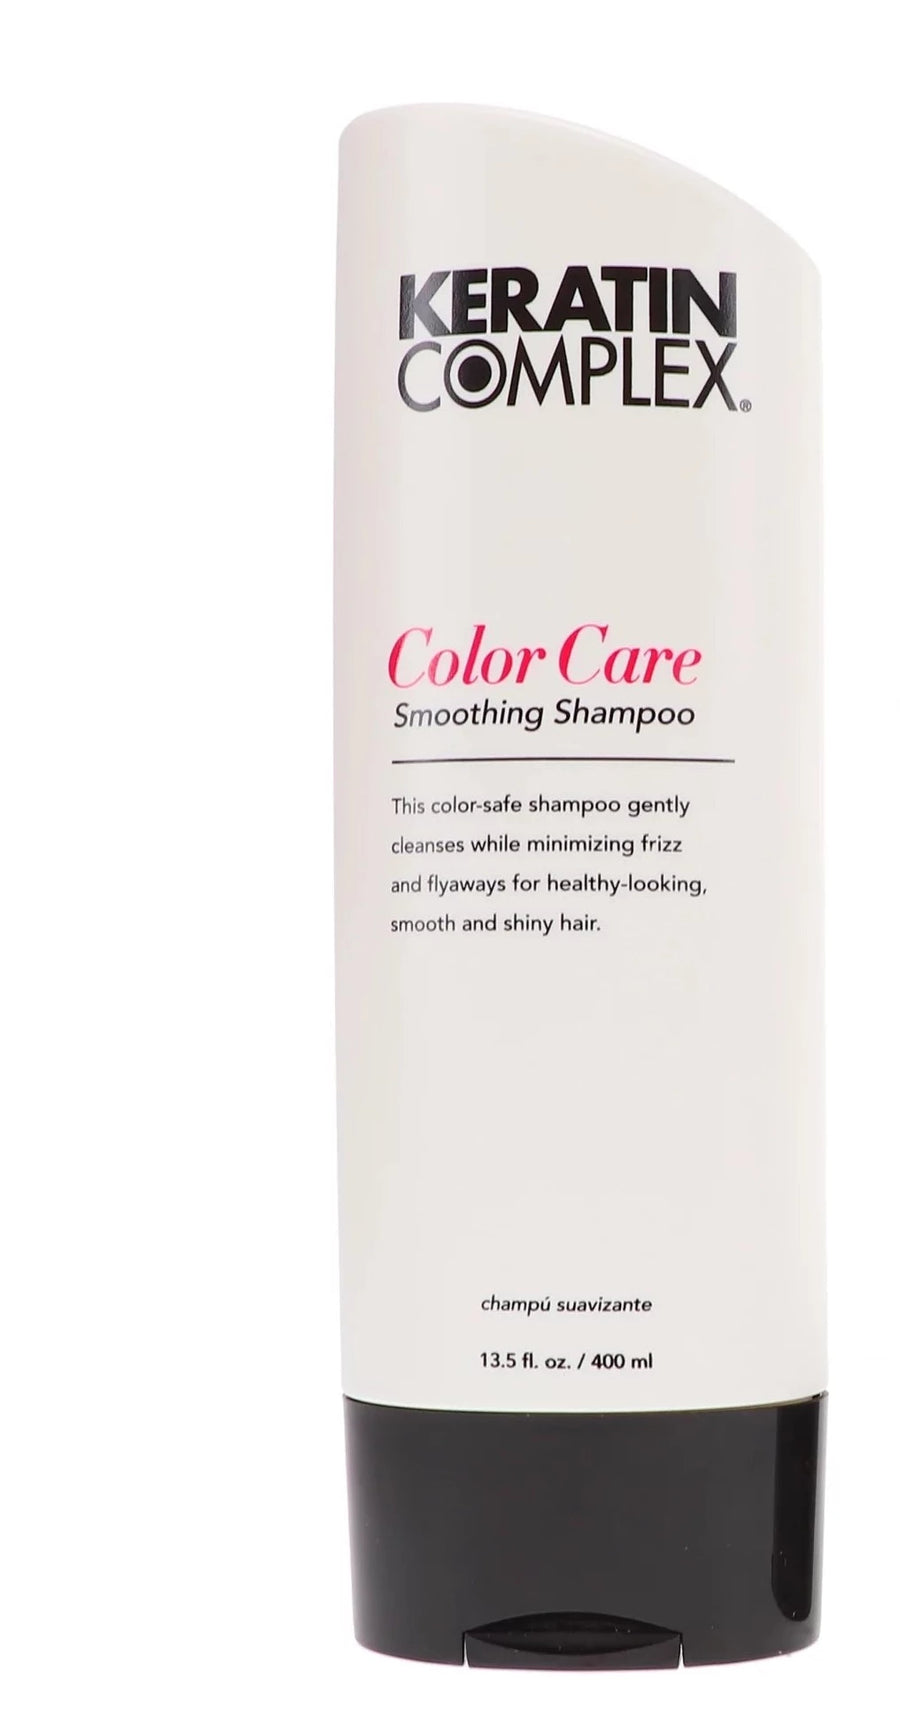 Keratin Complex Color Care Smoothing Shampoo image of 13.5 oz bottle